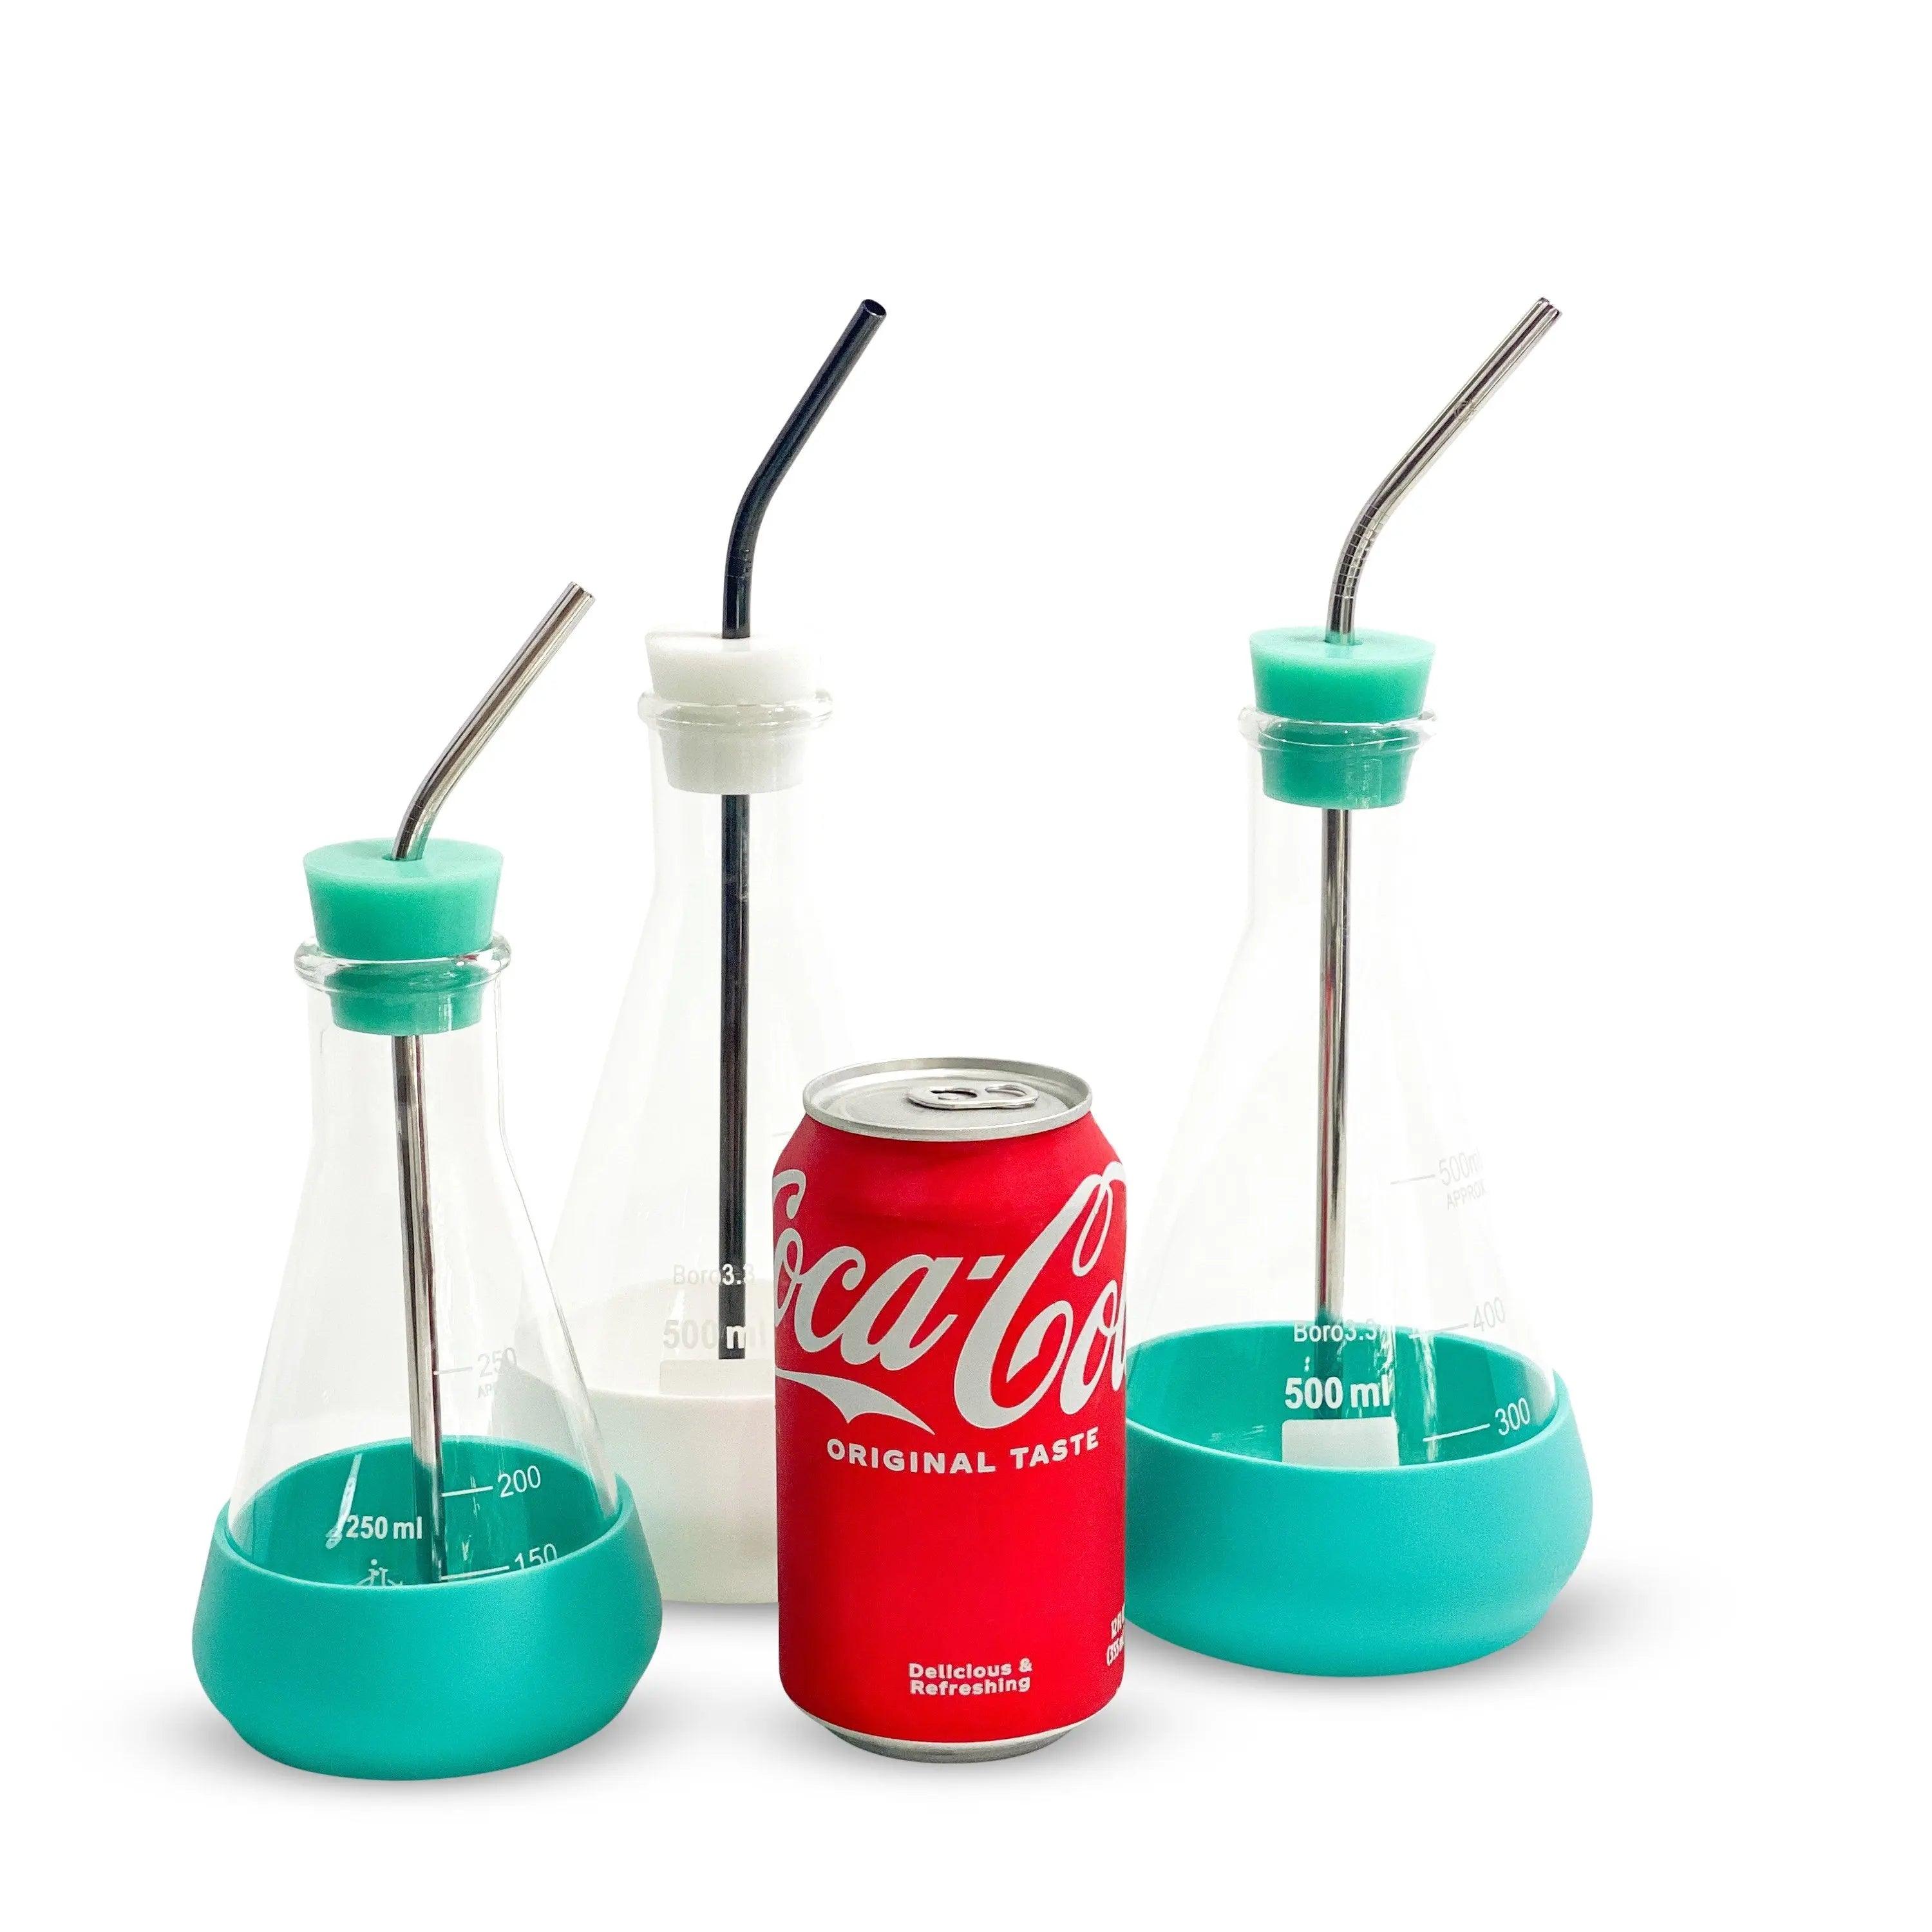 Smaller Chemistry Drink Tumbler With Straw Set